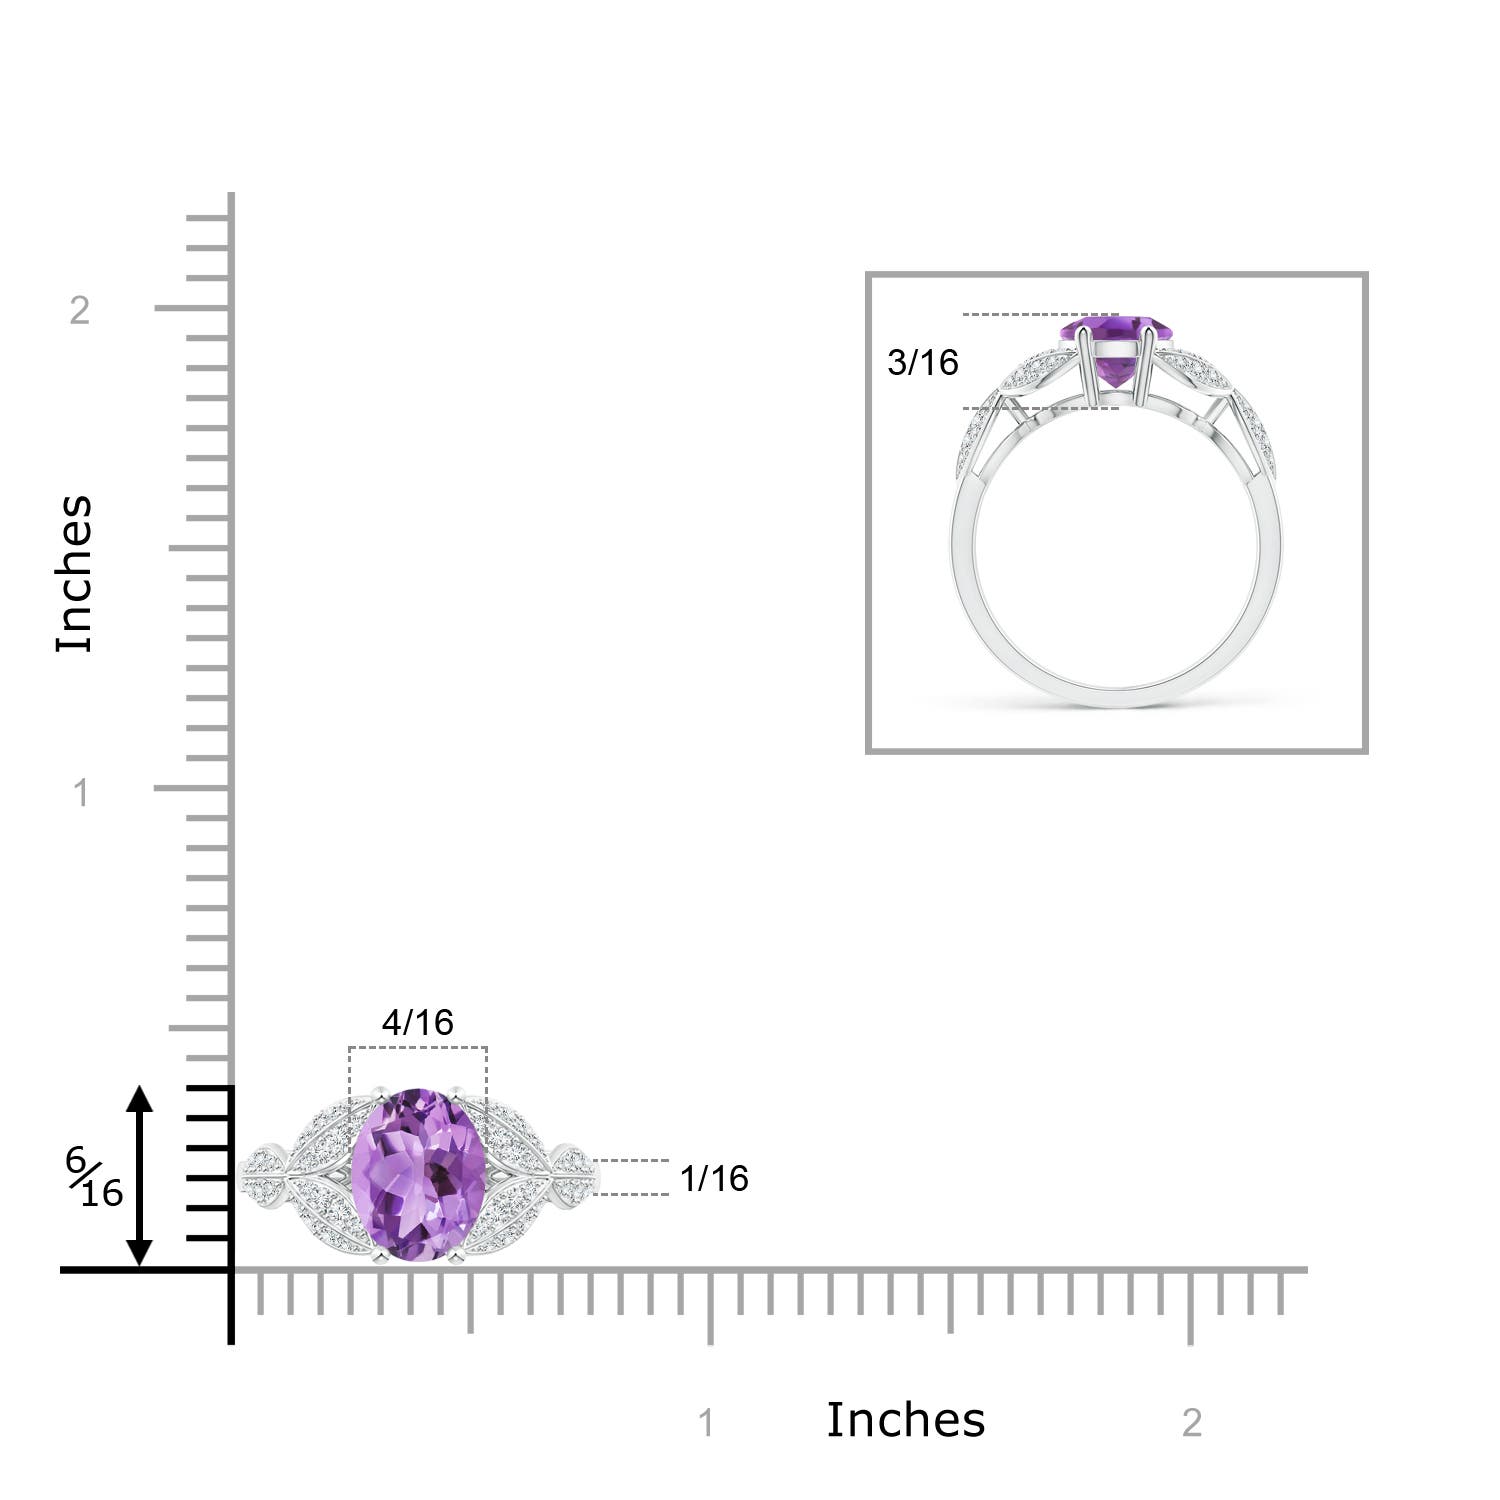 A - Amethyst / 1.88 CT / 14 KT White Gold